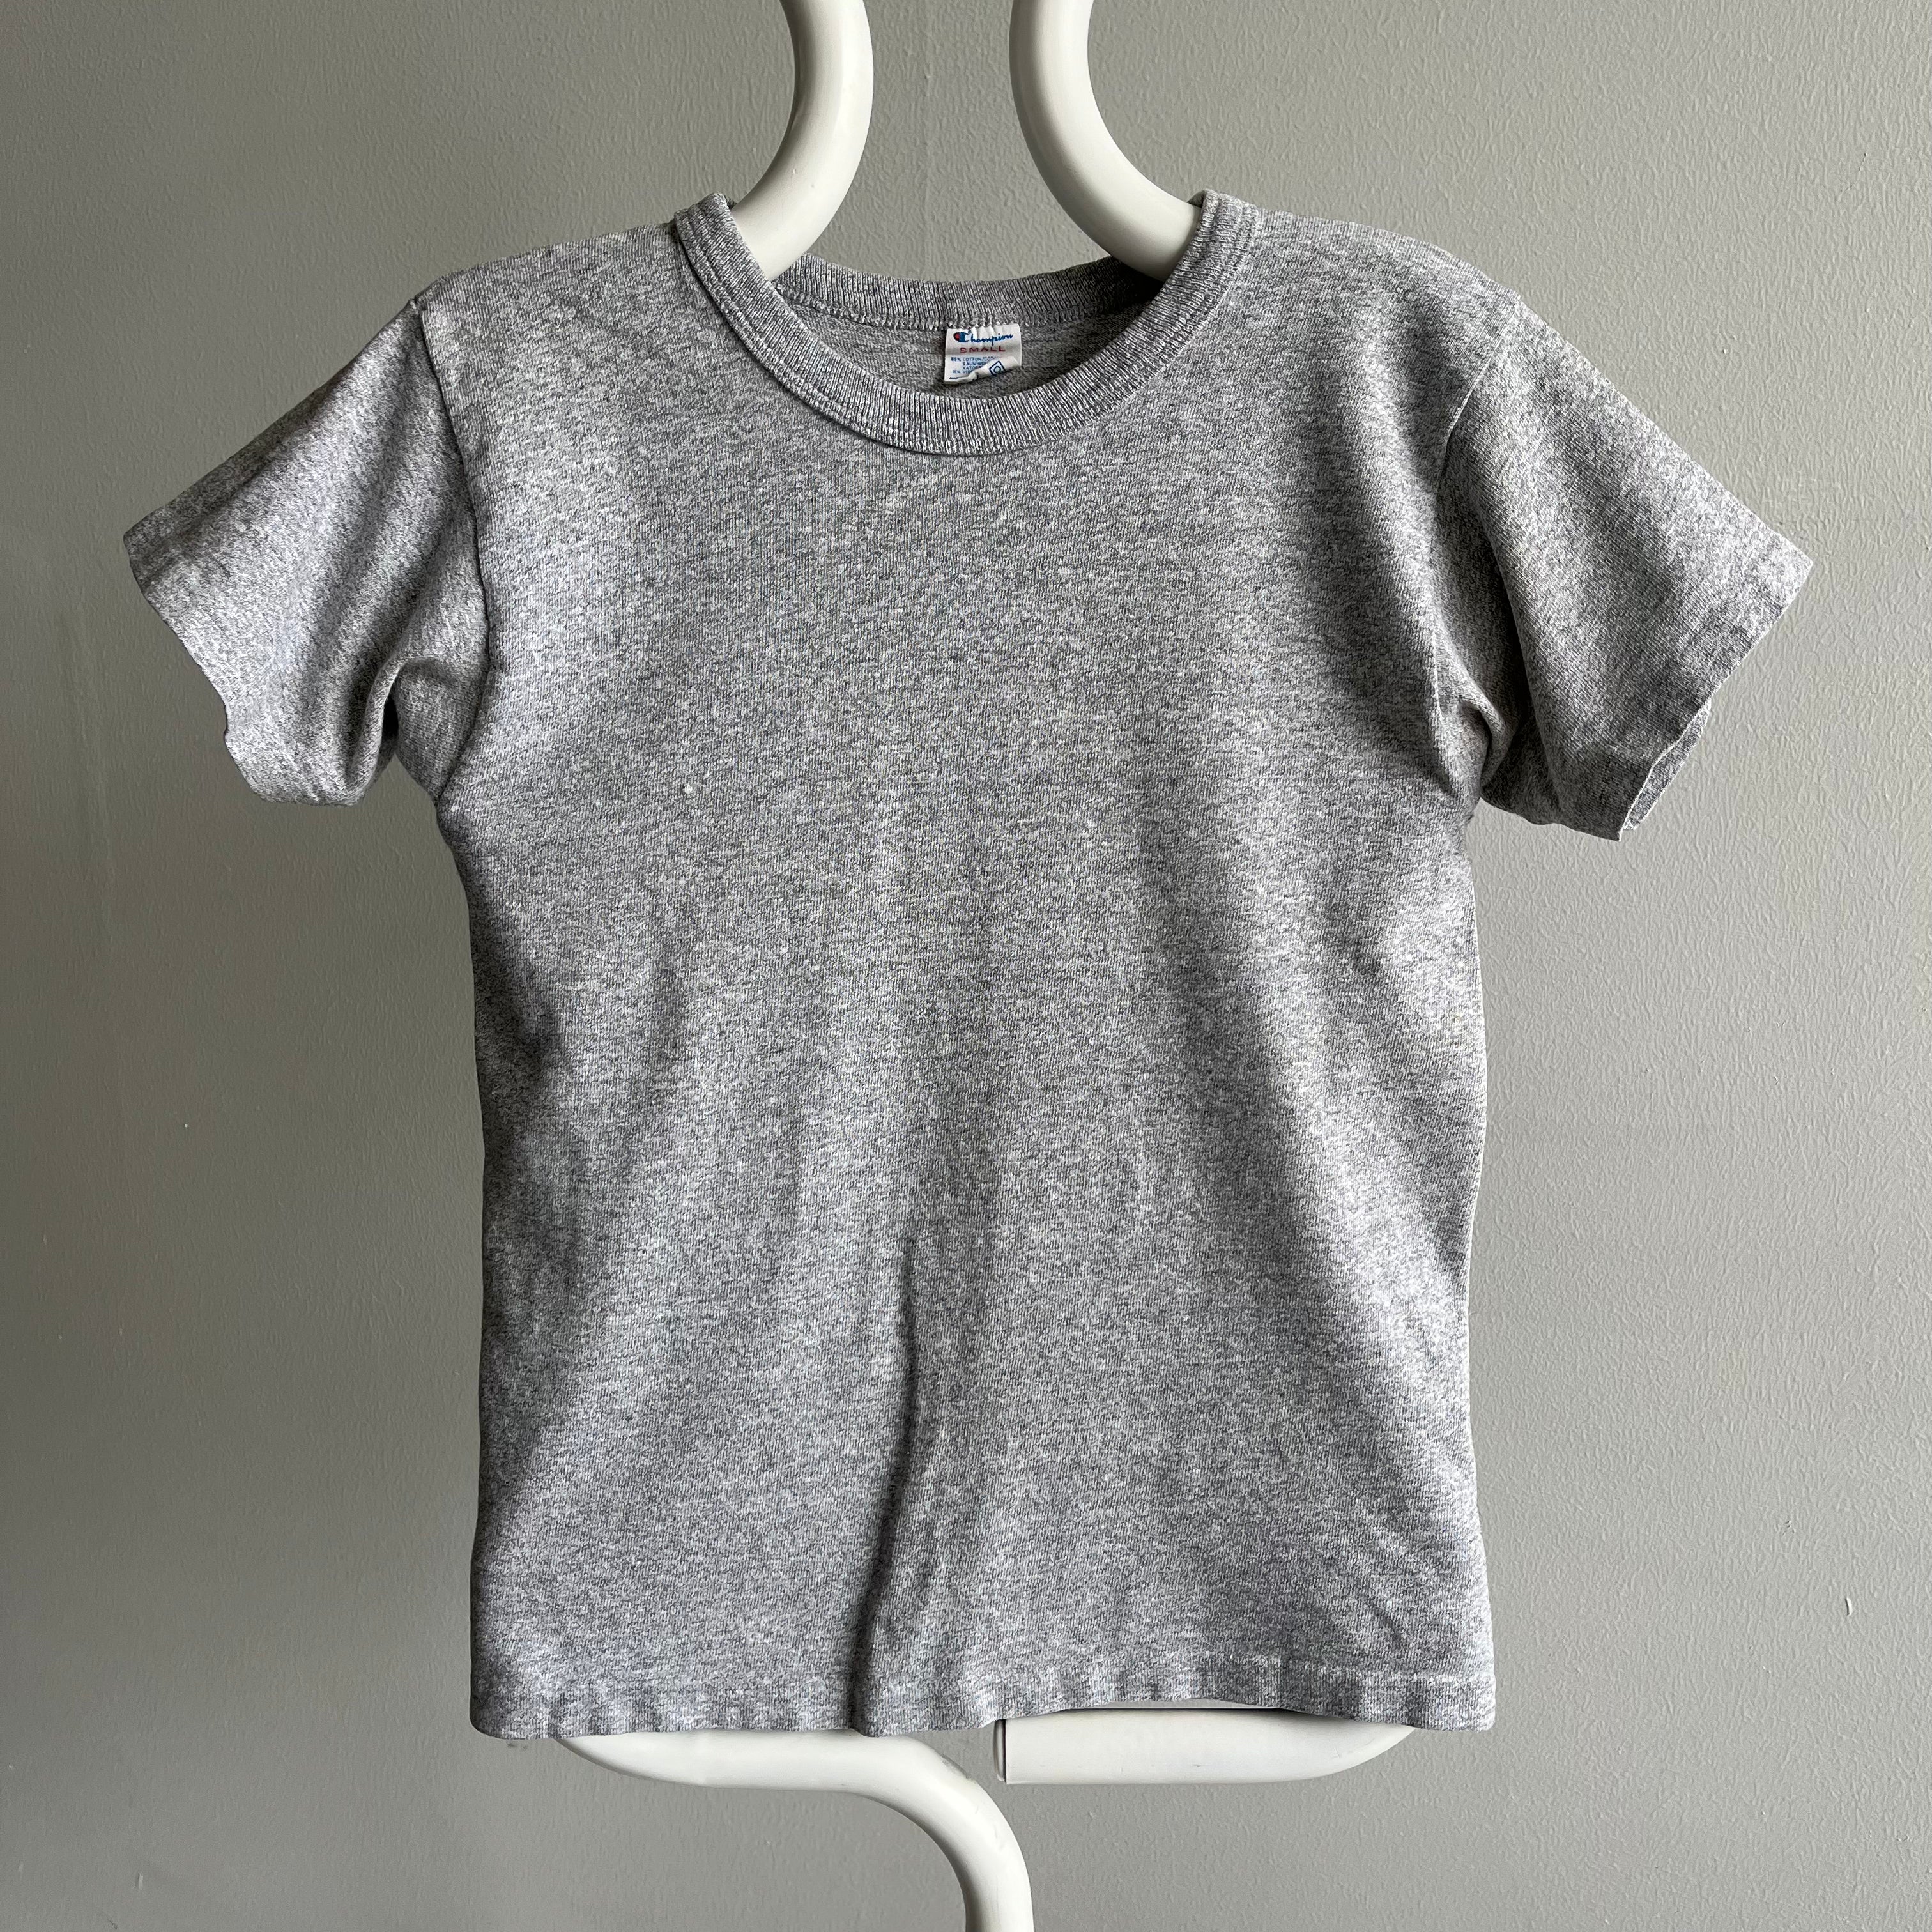 1970/80s Blank Gray USA Made Champion Brand Cotton T-Shirt with Rolled Neck